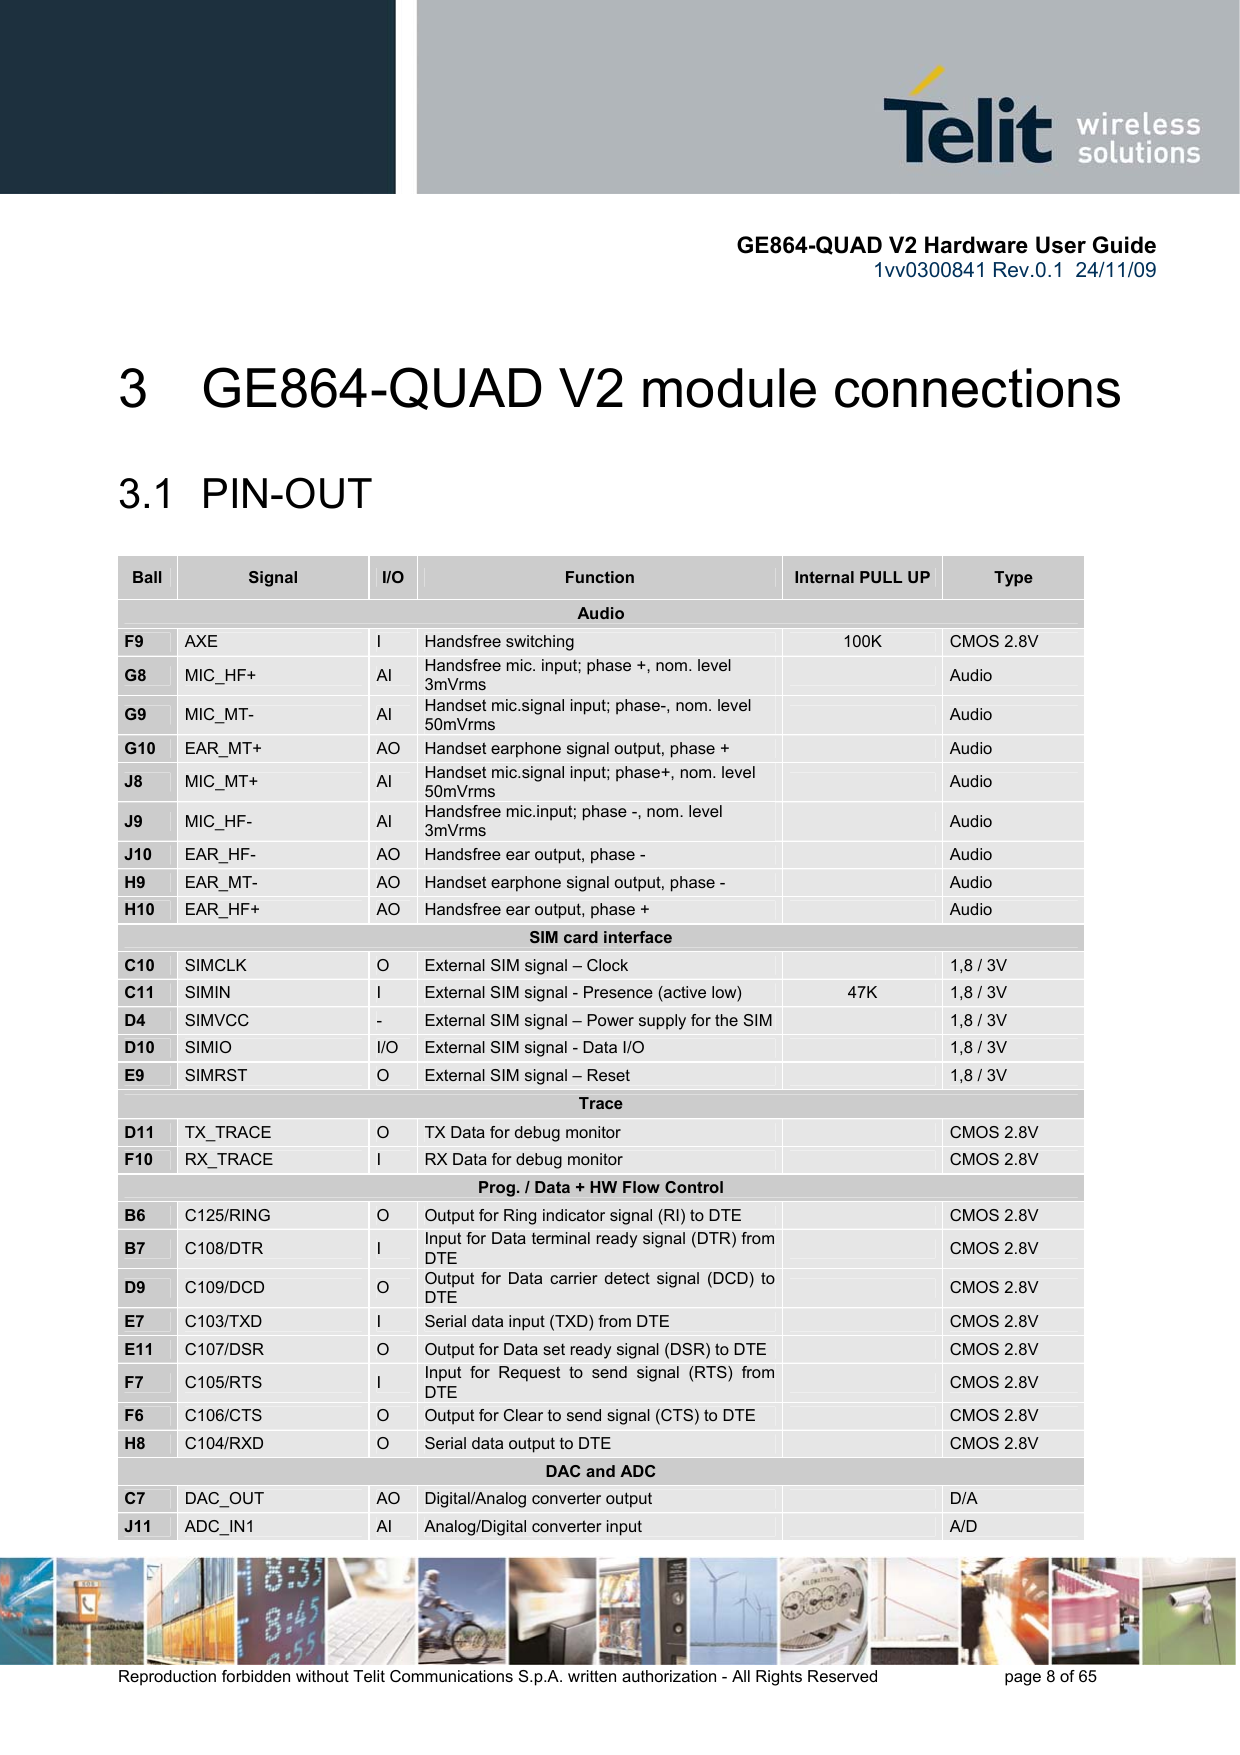       GE864-QUAD V2 Hardware User Guide 1vv0300841 Rev.0.1  24/11/09      Reproduction forbidden without Telit Communications S.p.A. written authorization - All Rights Reserved    page 8 of 65  3  GE864-QUAD V2 module connections  3.1  PIN-OUT Ball  Signal  I/O  Function  Internal PULL UP  Type Audio F9  AXE  I  Handsfree switching   100K  CMOS 2.8V G8  MIC_HF+  AI  Handsfree mic. input; phase +, nom. level 3mVrms     Audio G9  MIC_MT-  AI  Handset mic.signal input; phase-, nom. level 50mVrms     Audio G10  EAR_MT+  AO  Handset earphone signal output, phase +     Audio J8  MIC_MT+  AI  Handset mic.signal input; phase+, nom. level 50mVrms     Audio J9  MIC_HF-  AI  Handsfree mic.input; phase -, nom. level 3mVrms     Audio J10  EAR_HF-  AO  Handsfree ear output, phase -     Audio H9  EAR_MT-  AO  Handset earphone signal output, phase -     Audio H10  EAR_HF+  AO  Handsfree ear output, phase +     Audio SIM card interface C10  SIMCLK  O  External SIM signal – Clock     1,8 / 3V C11  SIMIN  I  External SIM signal - Presence (active low)  47K  1,8 / 3V D4  SIMVCC  -  External SIM signal – Power supply for the SIM     1,8 / 3V D10  SIMIO  I/O  External SIM signal - Data I/O     1,8 / 3V E9  SIMRST  O  External SIM signal – Reset     1,8 / 3V Trace D11  TX_TRACE  O  TX Data for debug monitor      CMOS 2.8V F10  RX_TRACE  I  RX Data for debug monitor      CMOS 2.8V Prog. / Data + HW Flow Control B6  C125/RING  O  Output for Ring indicator signal (RI) to DTE      CMOS 2.8V B7  C108/DTR  I  Input for Data terminal ready signal (DTR) from DTE       CMOS 2.8V D9  C109/DCD  O  Output for Data carrier detect signal (DCD) to DTE      CMOS 2.8V E7  C103/TXD  I  Serial data input (TXD) from DTE      CMOS 2.8V E11  C107/DSR  O  Output for Data set ready signal (DSR) to DTE     CMOS 2.8V F7  C105/RTS  I  Input for Request to send signal (RTS) from DTE      CMOS 2.8V F6  C106/CTS  O  Output for Clear to send signal (CTS) to DTE      CMOS 2.8V H8  C104/RXD  O  Serial data output to DTE      CMOS 2.8V DAC and ADC C7  DAC_OUT  AO  Digital/Analog converter output     D/A J11  ADC_IN1  AI  Analog/Digital converter input     A/D 